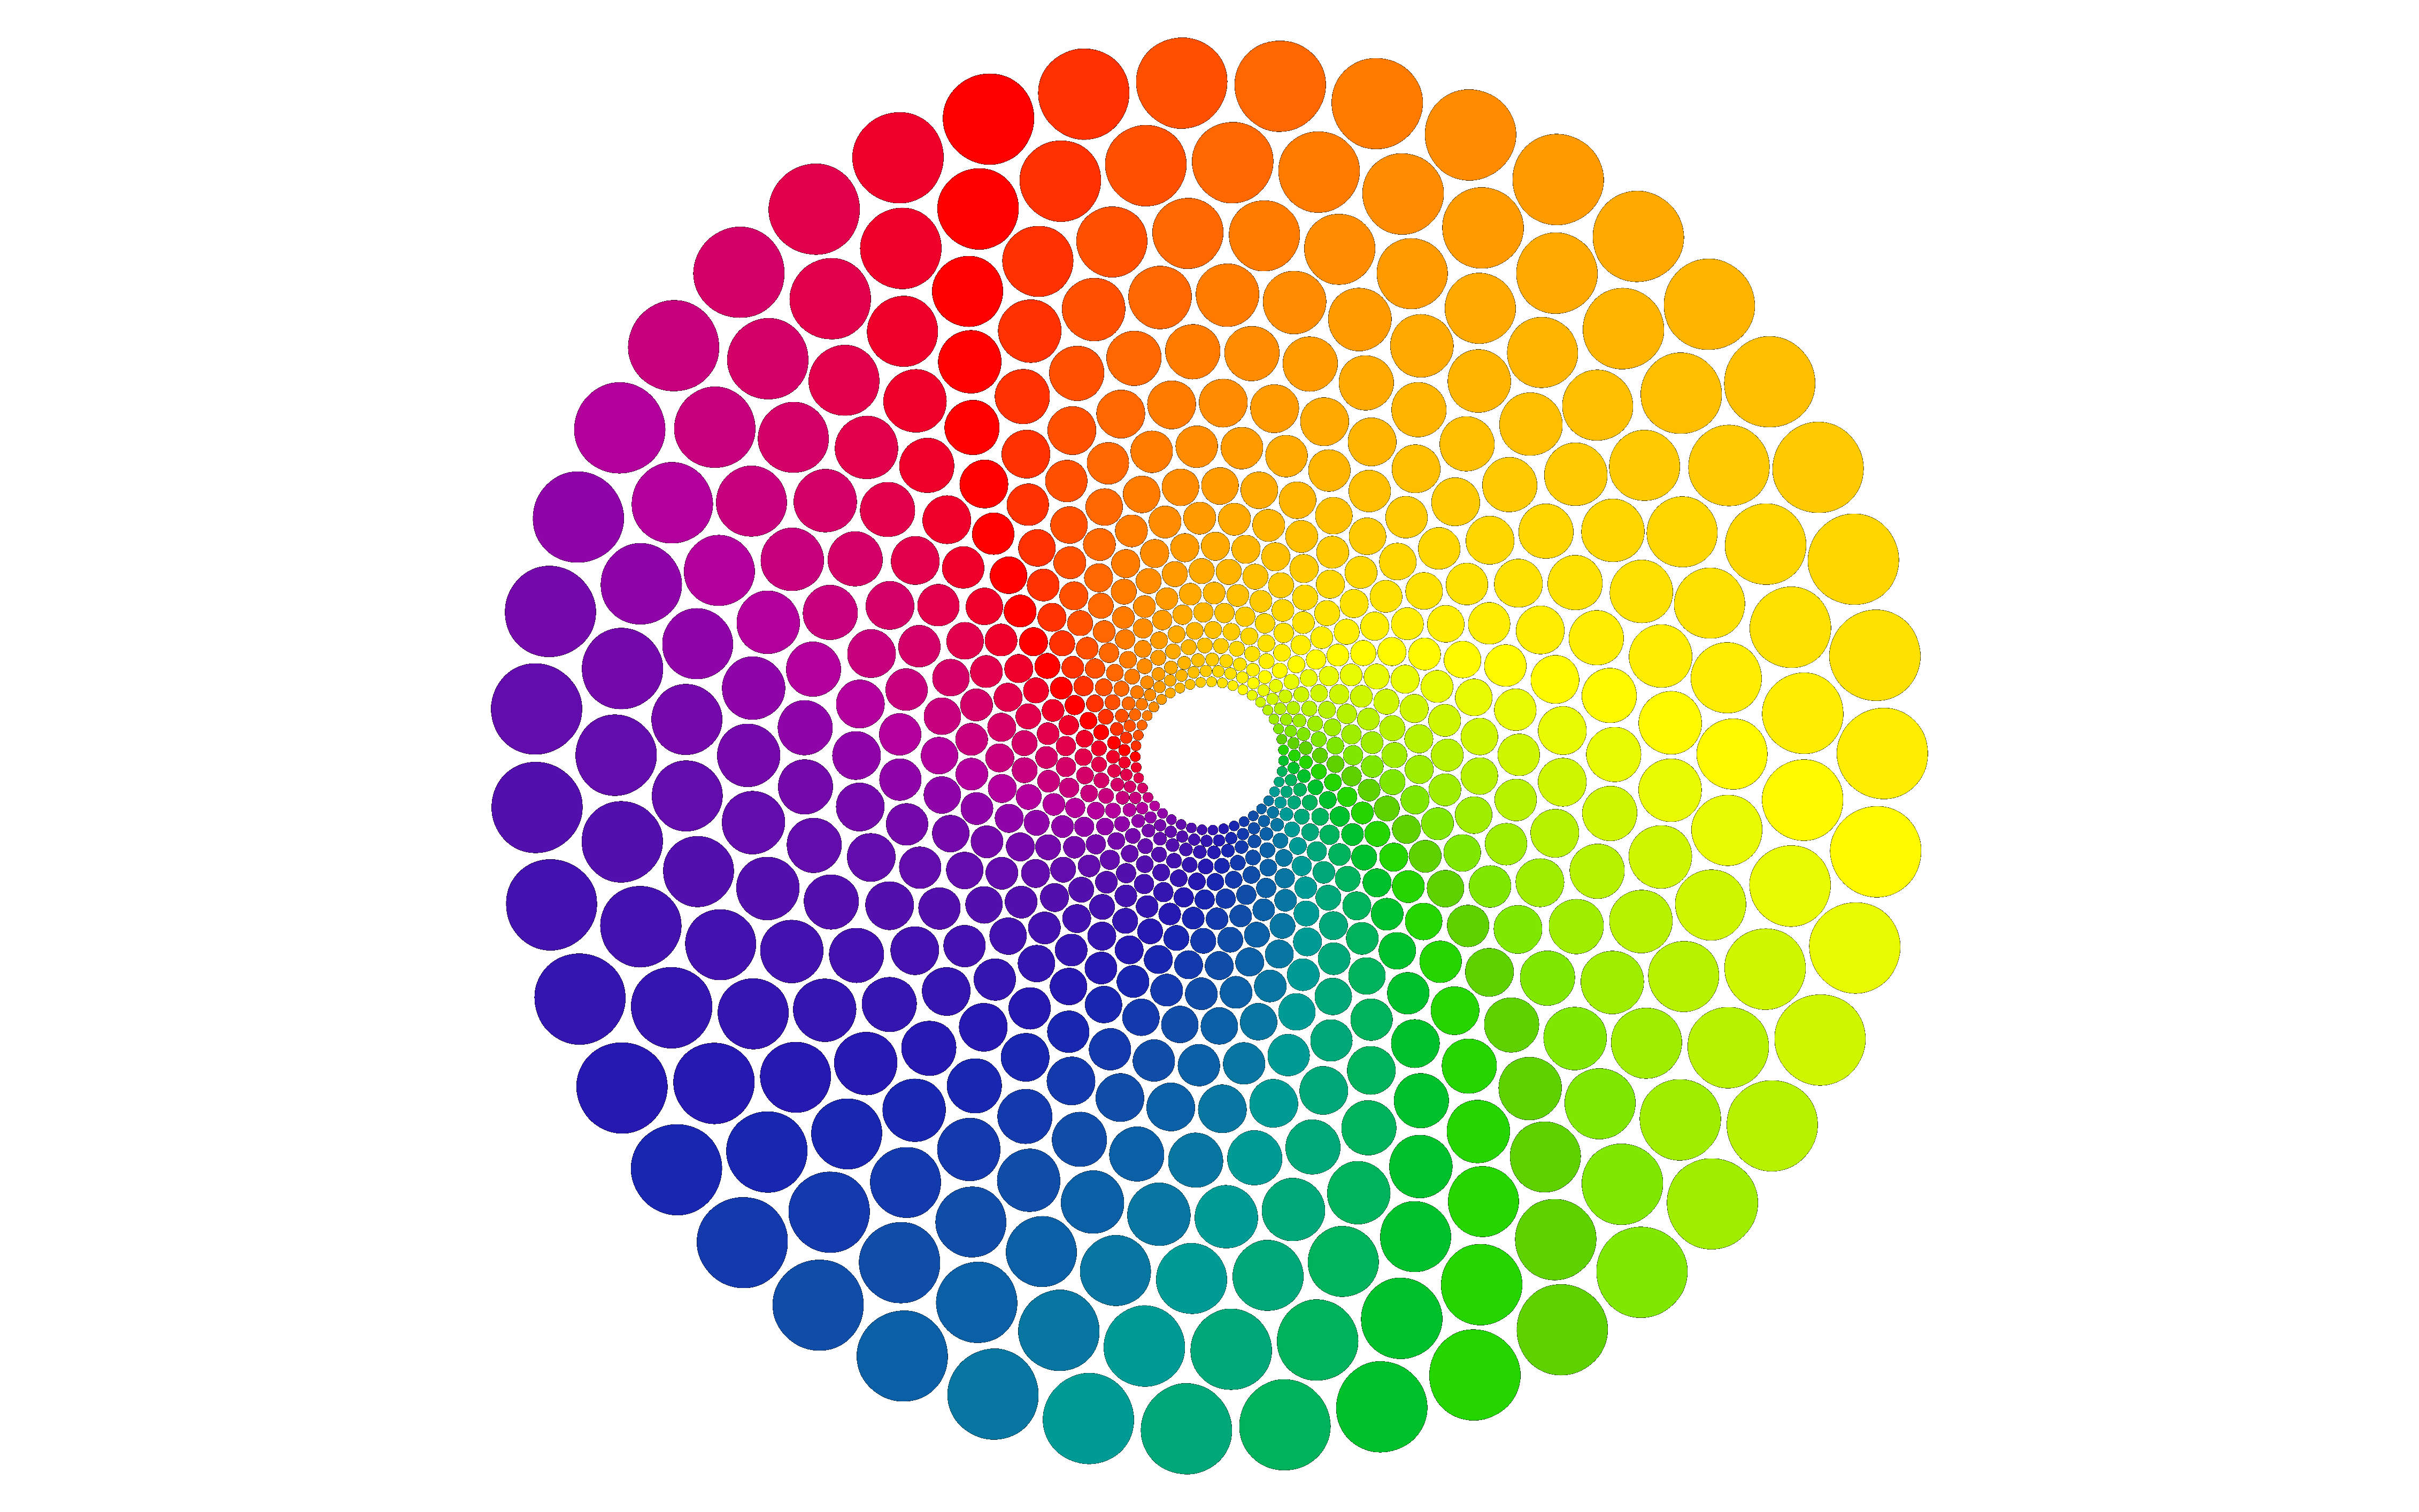 A logo of circles in a spiral with varrying colors